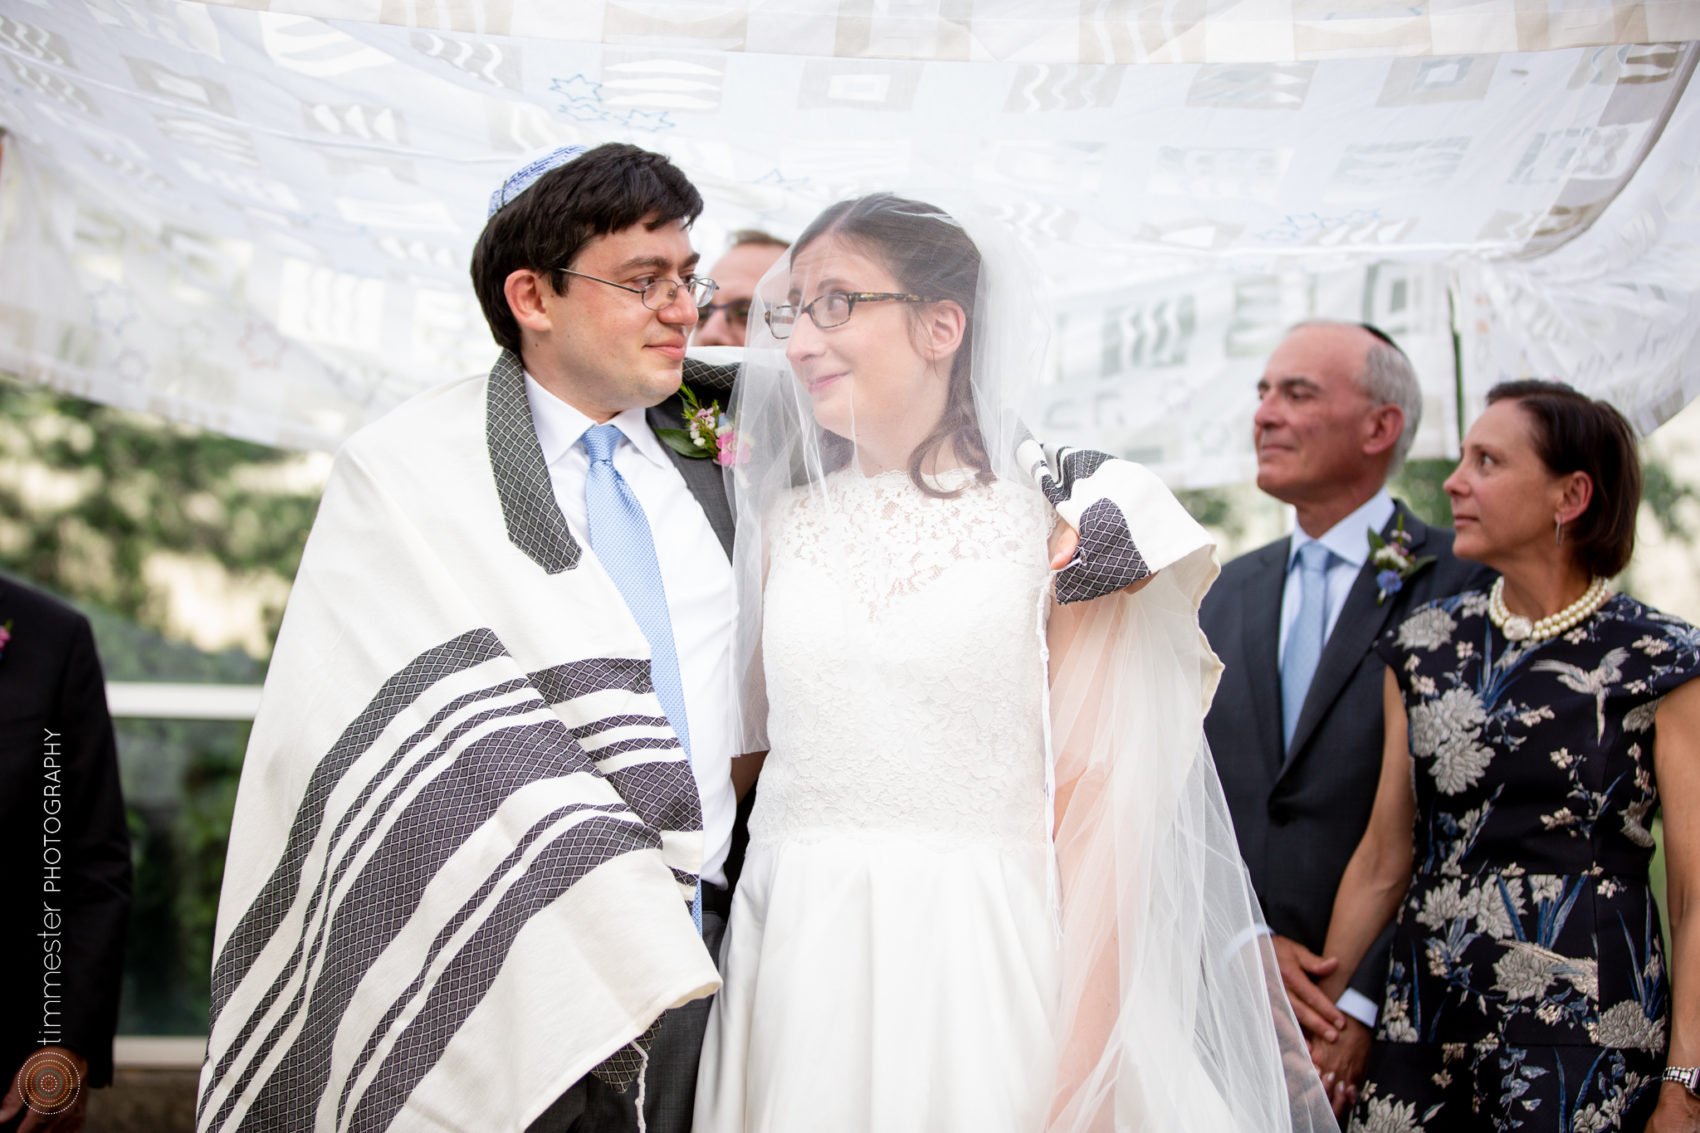 A Museum of Life and Science outdoor Jewish wedding ceremony